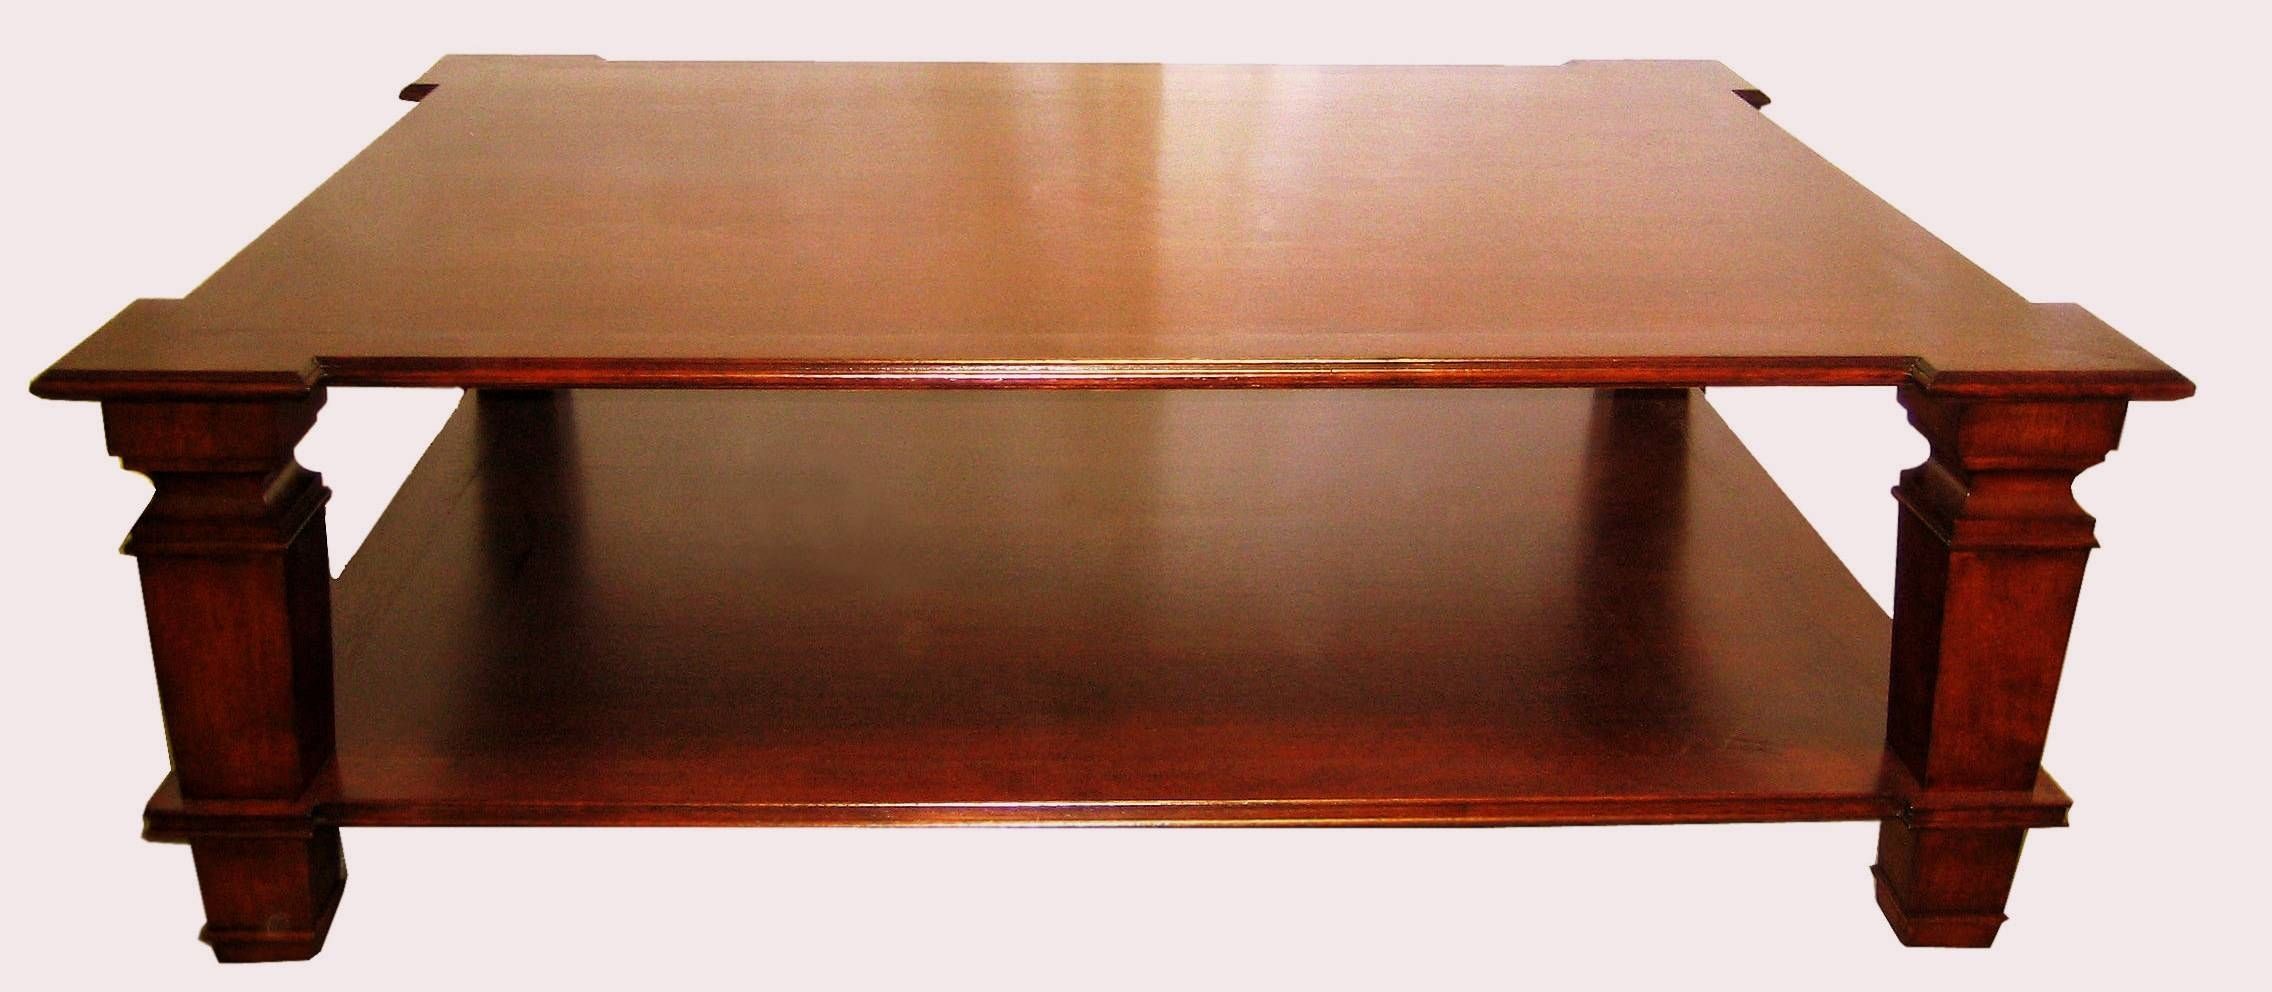 Mahogany Coffee Table Handmade And Industrial Products – Mahogany For Mahogany Coffee Tables (View 10 of 30)